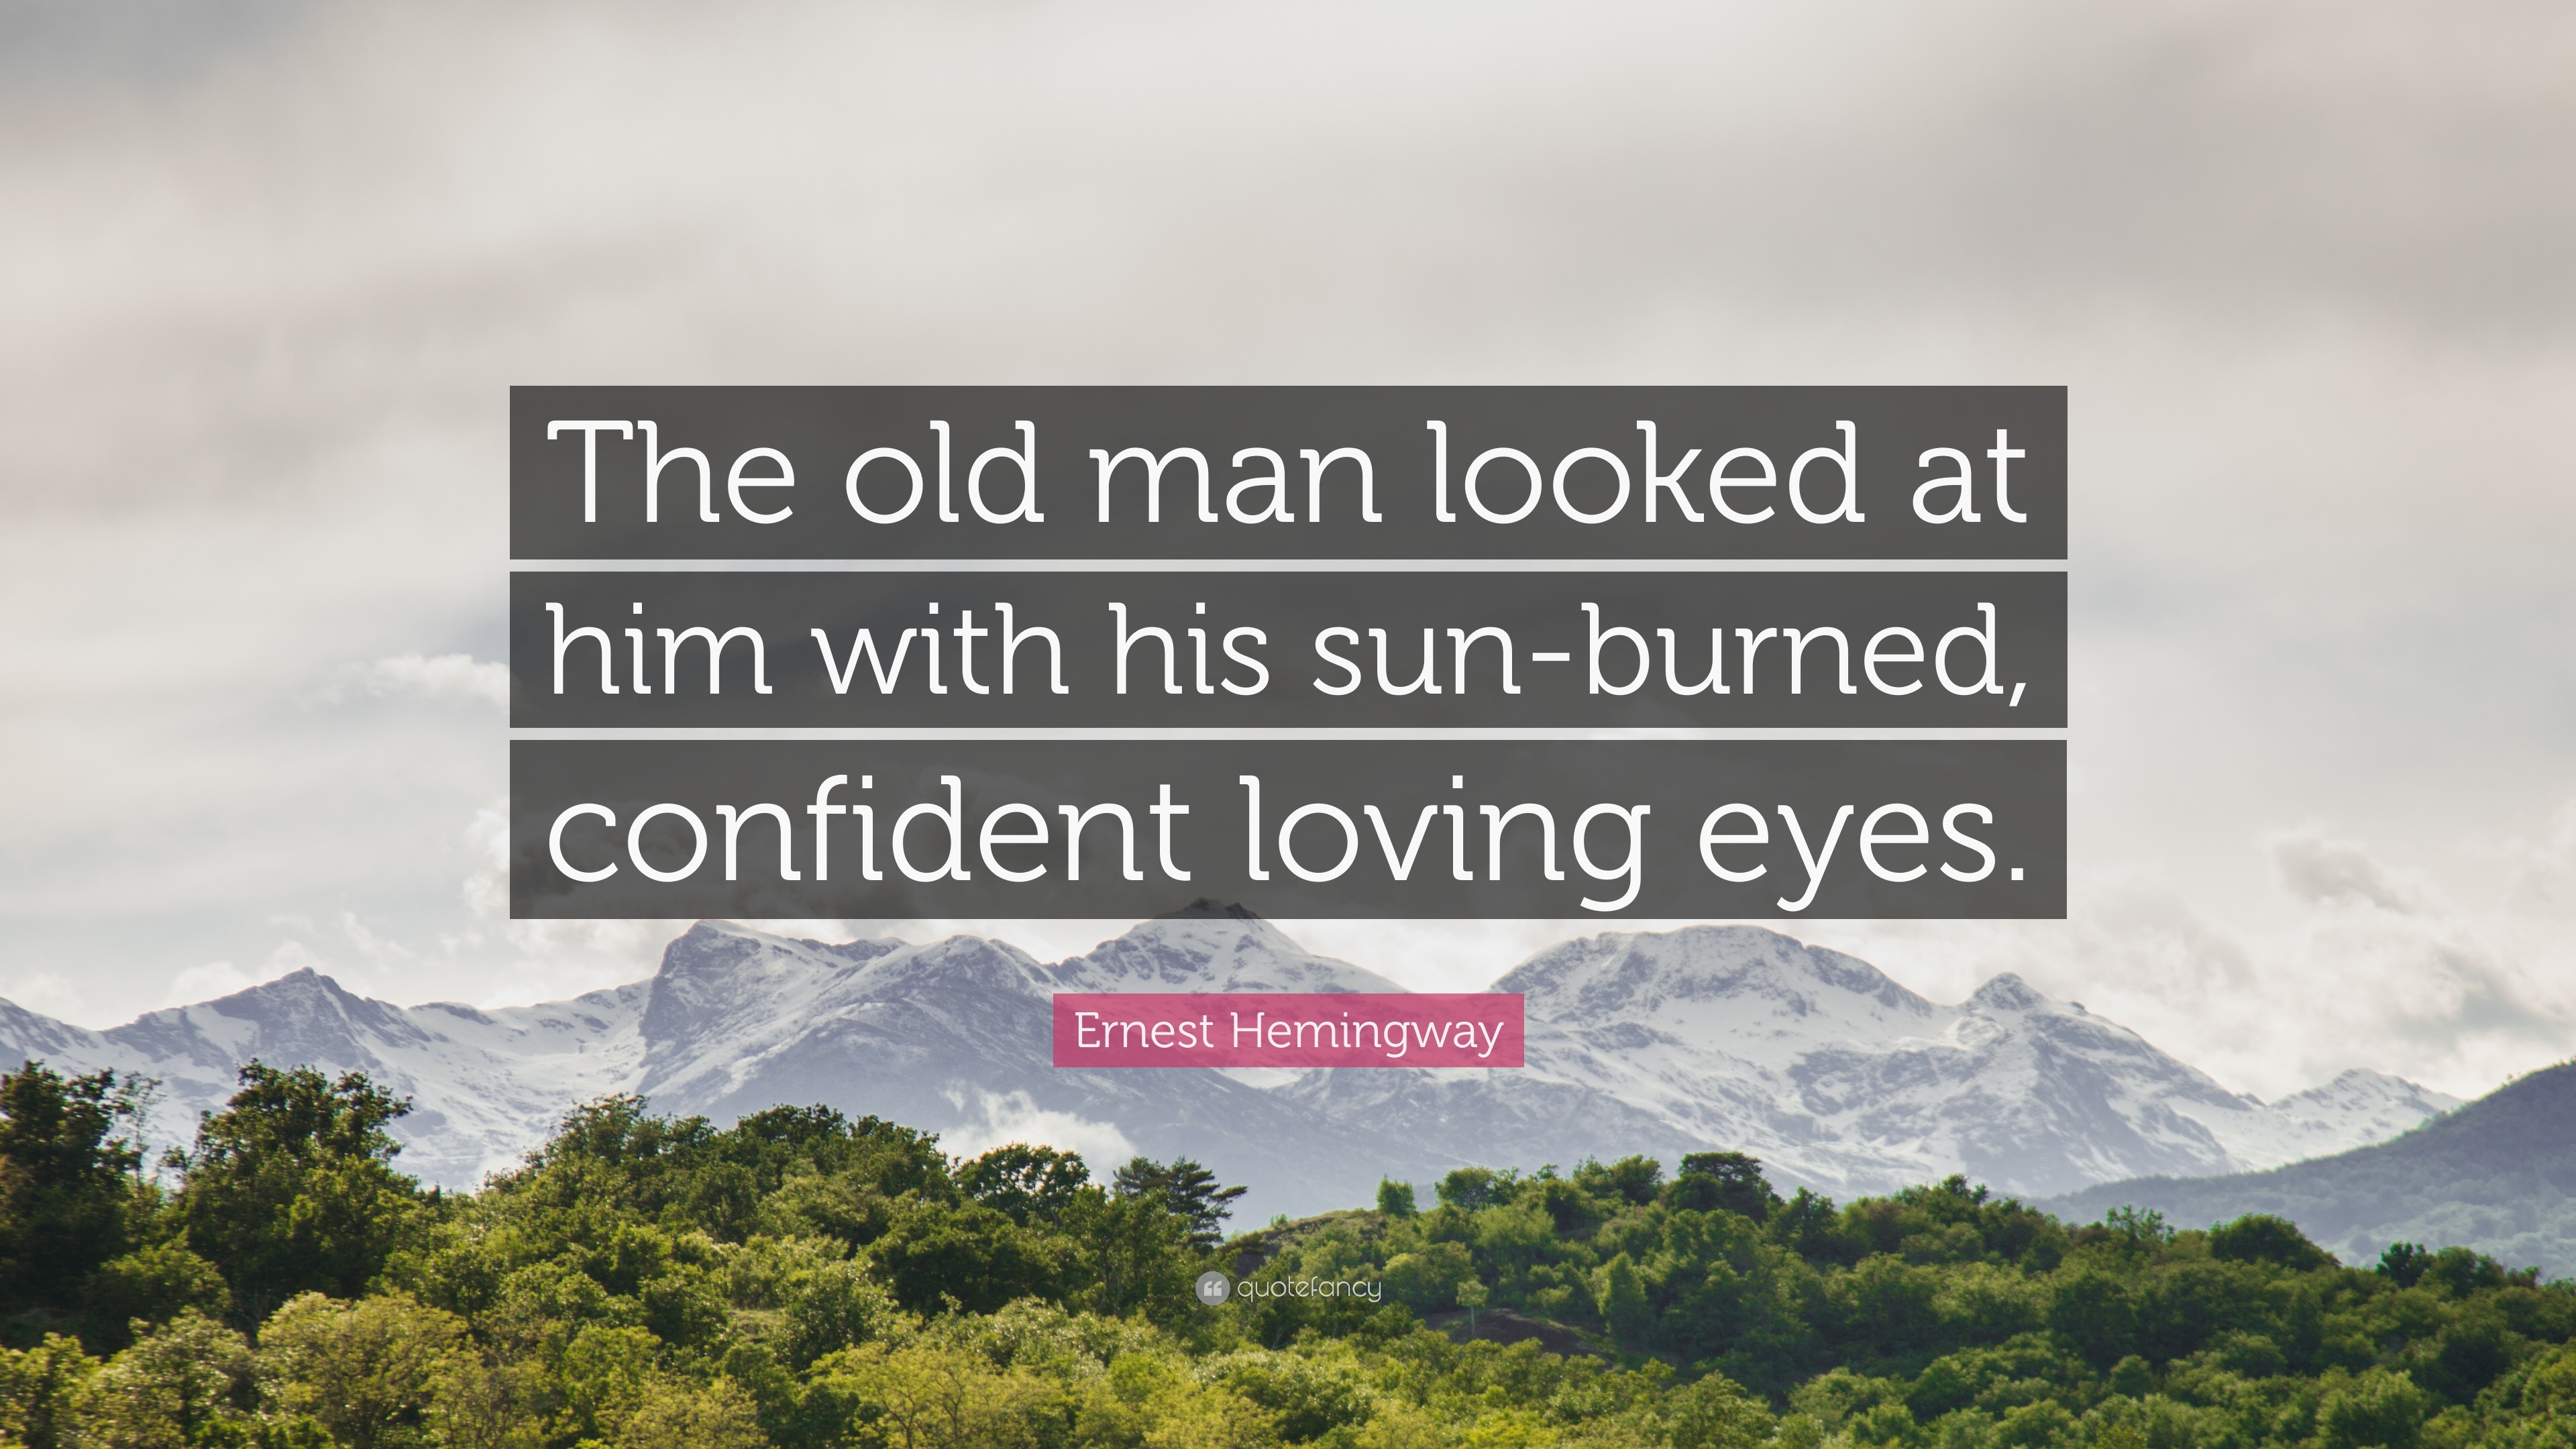 Ernest Hemingway Quote “The old man looked at him with his sun burned